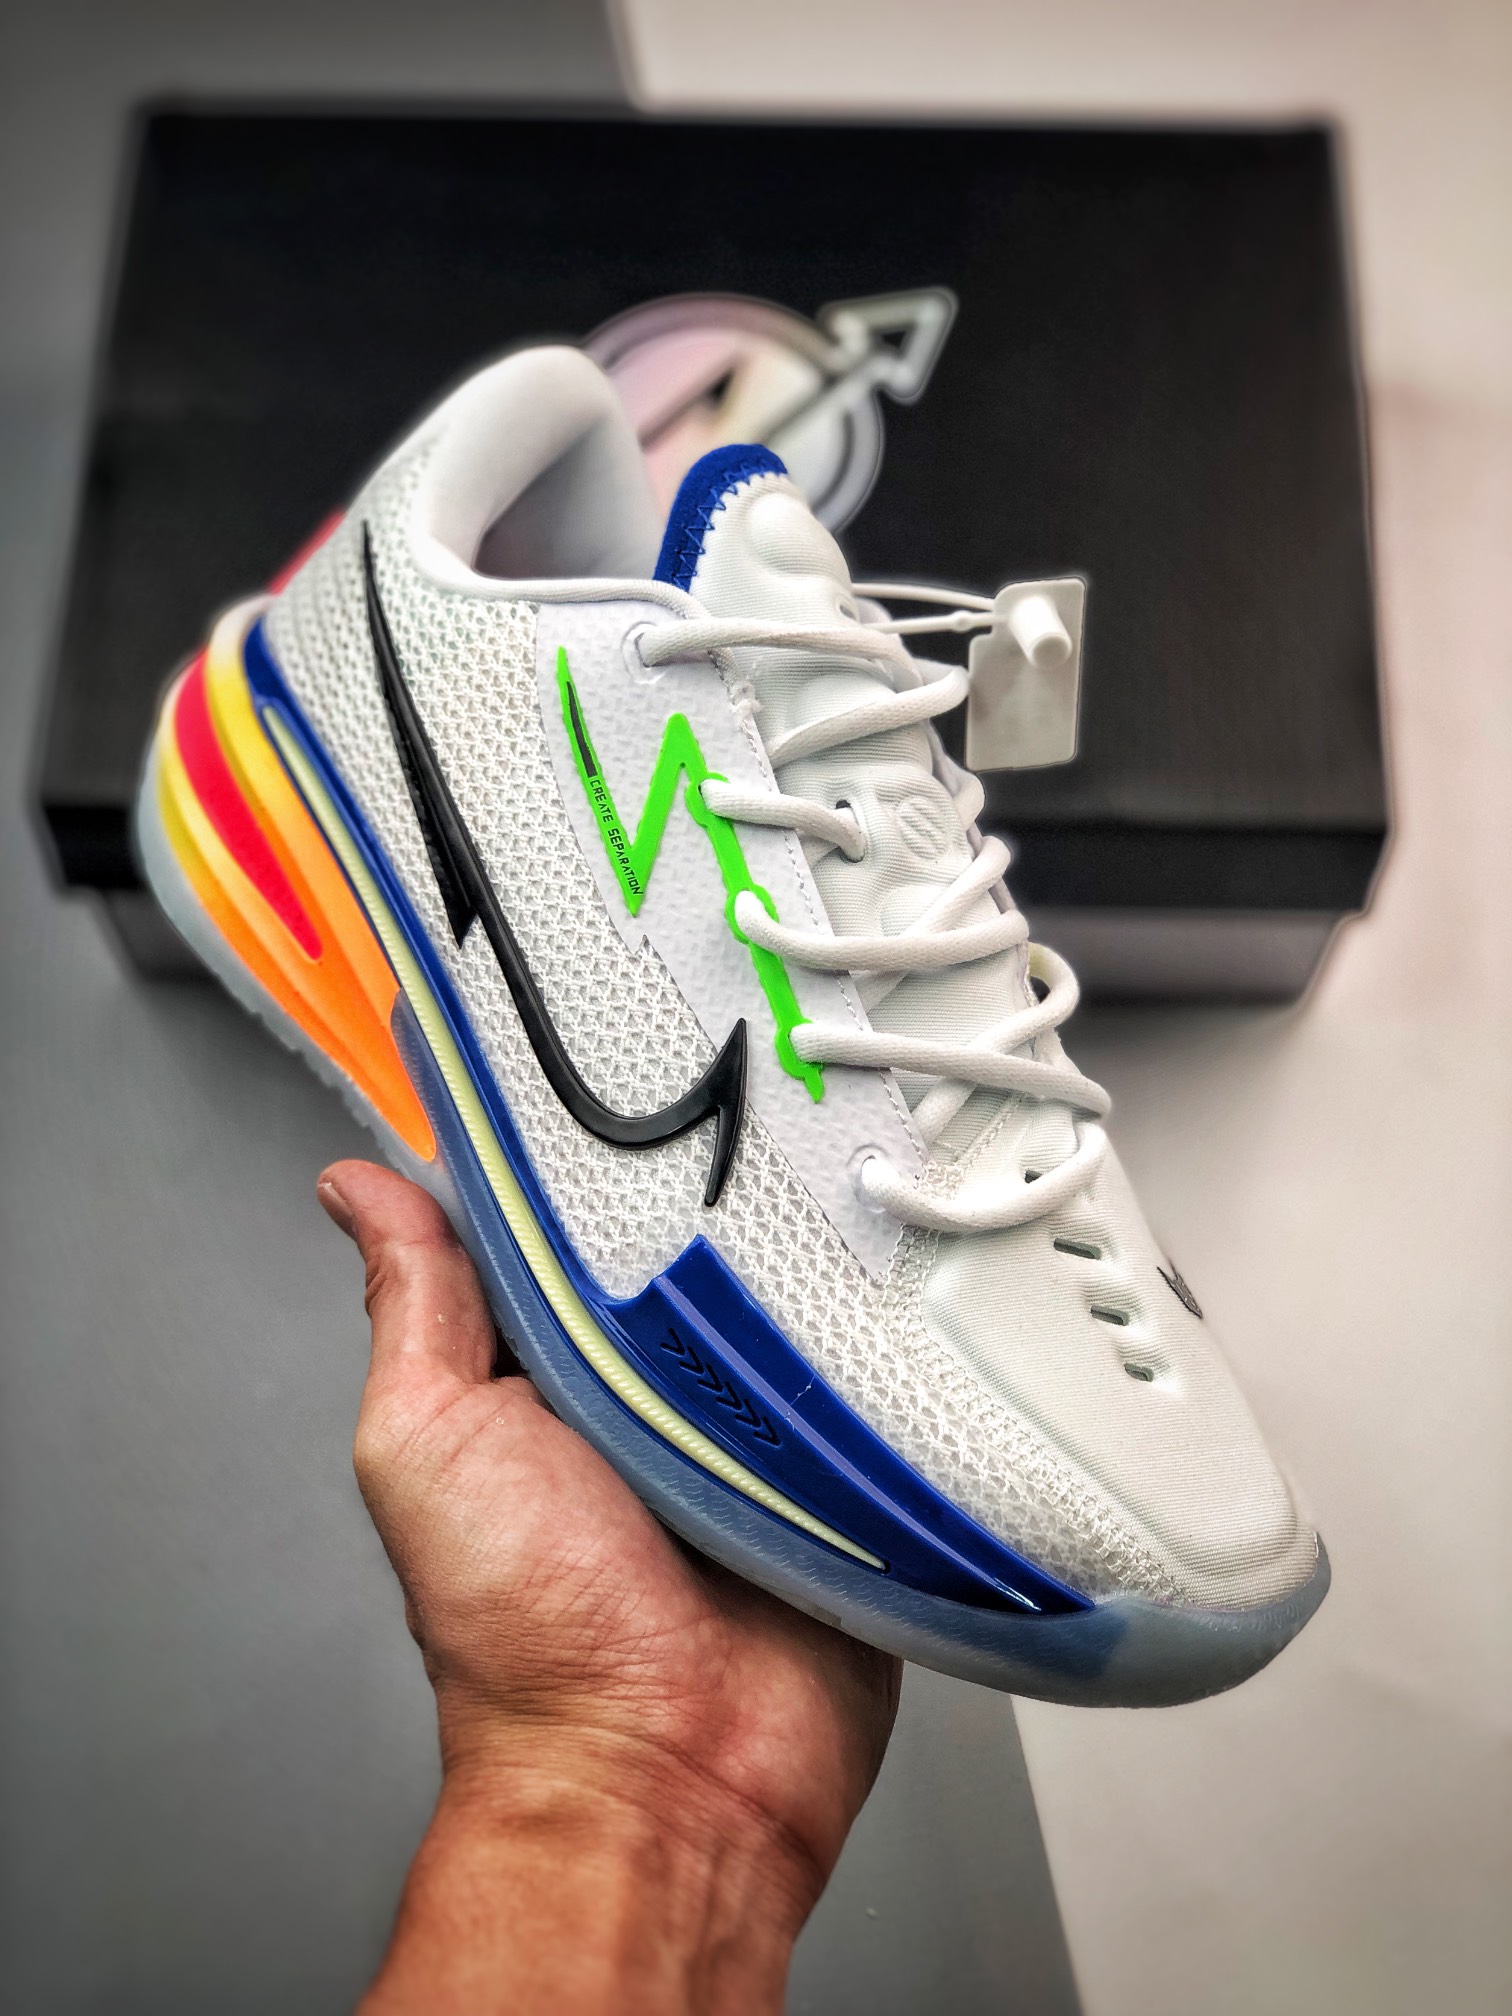 Nike Zoom GT Cut "Ghost" White/Multi-Color DX4112-114 Shoes